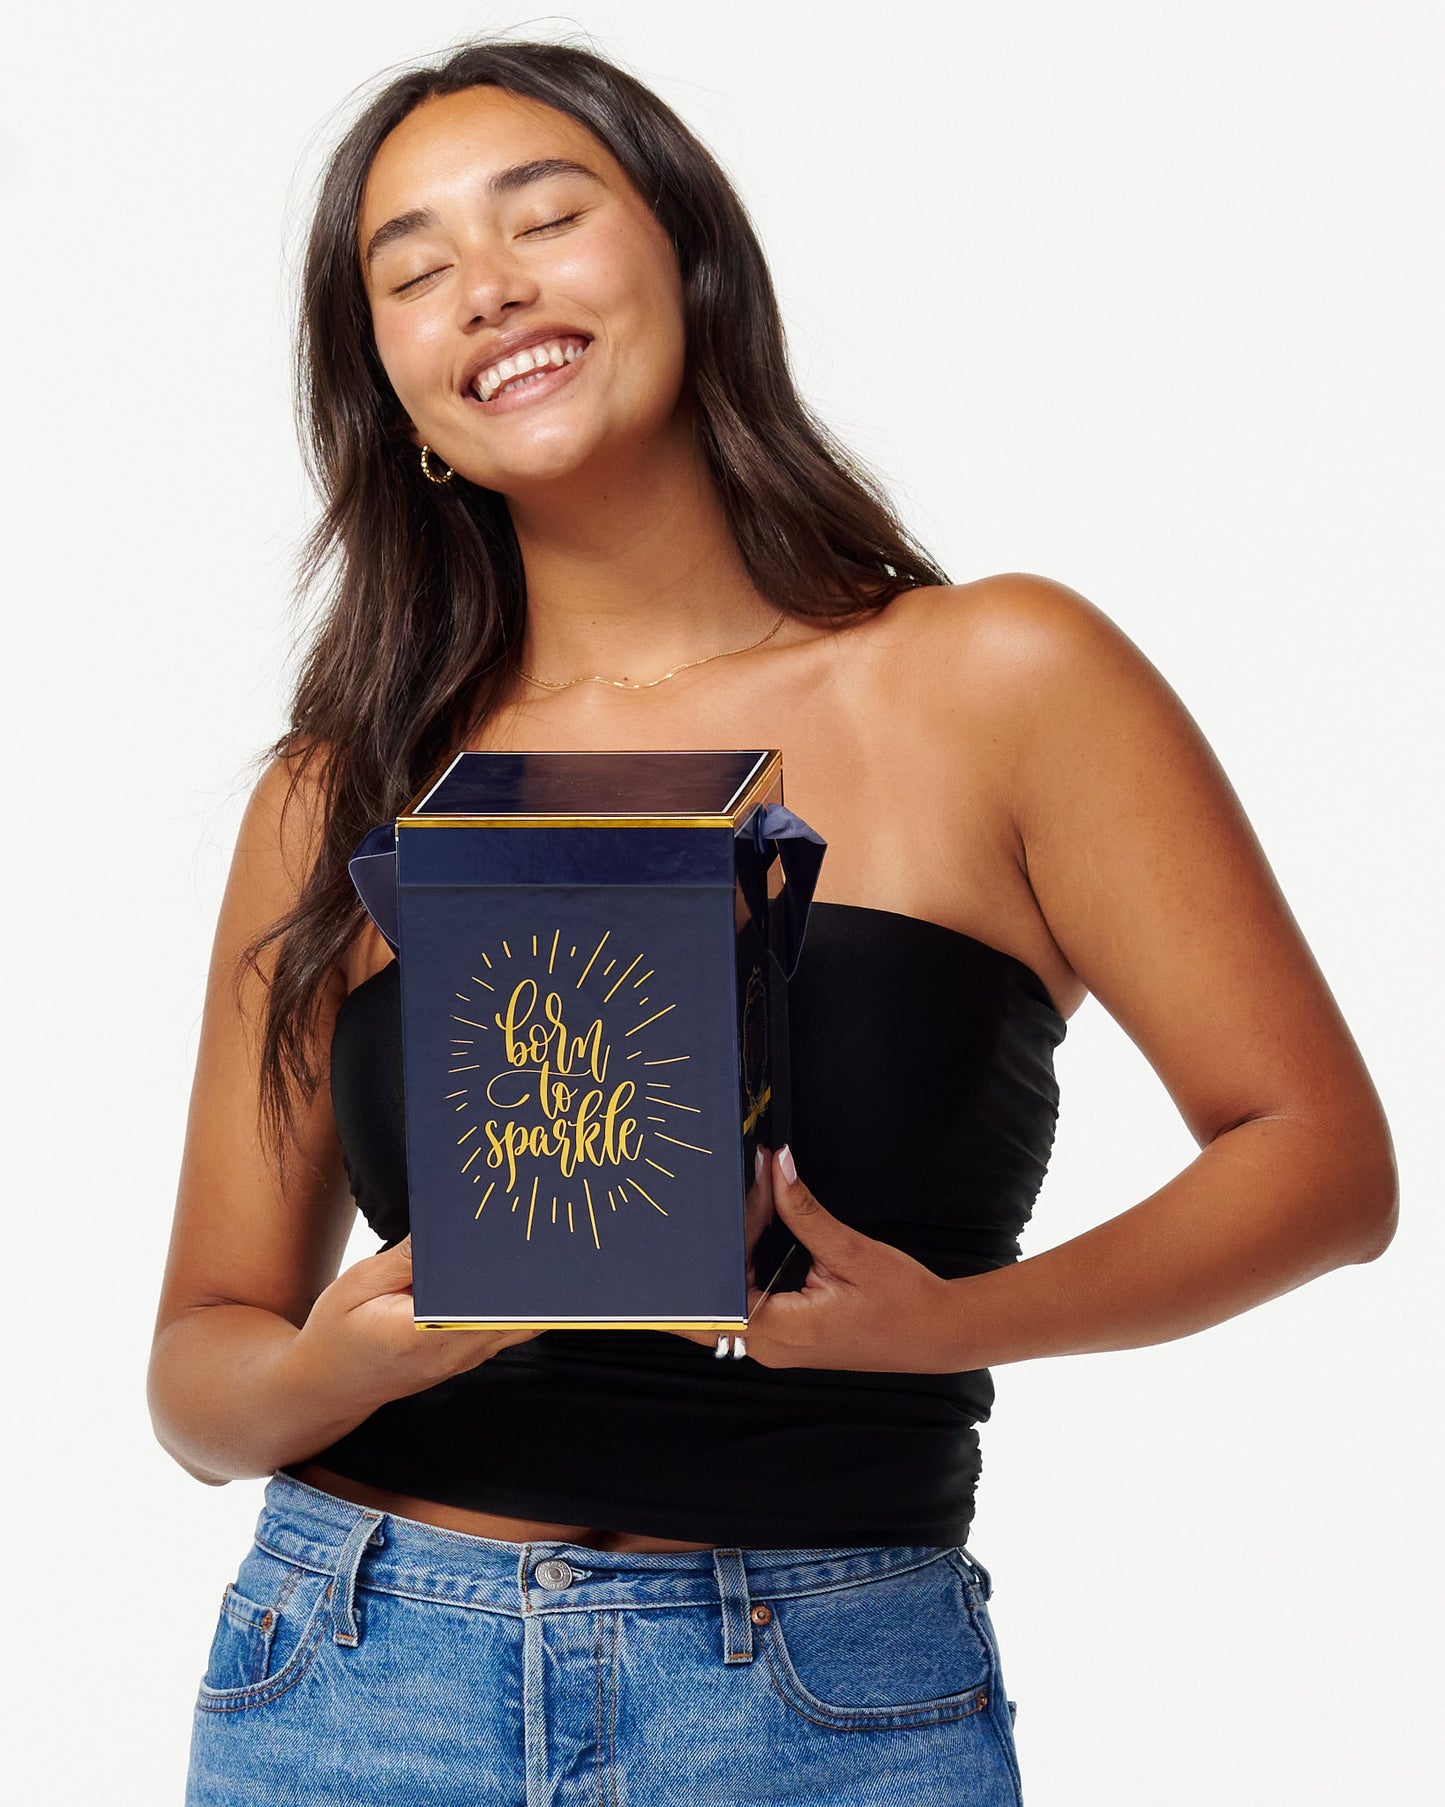 A smiling woman in a black top and jeans holds a blue box with the words "Born to Sparkle" in gold. She looks joyfully to the side, appearing content and playful.